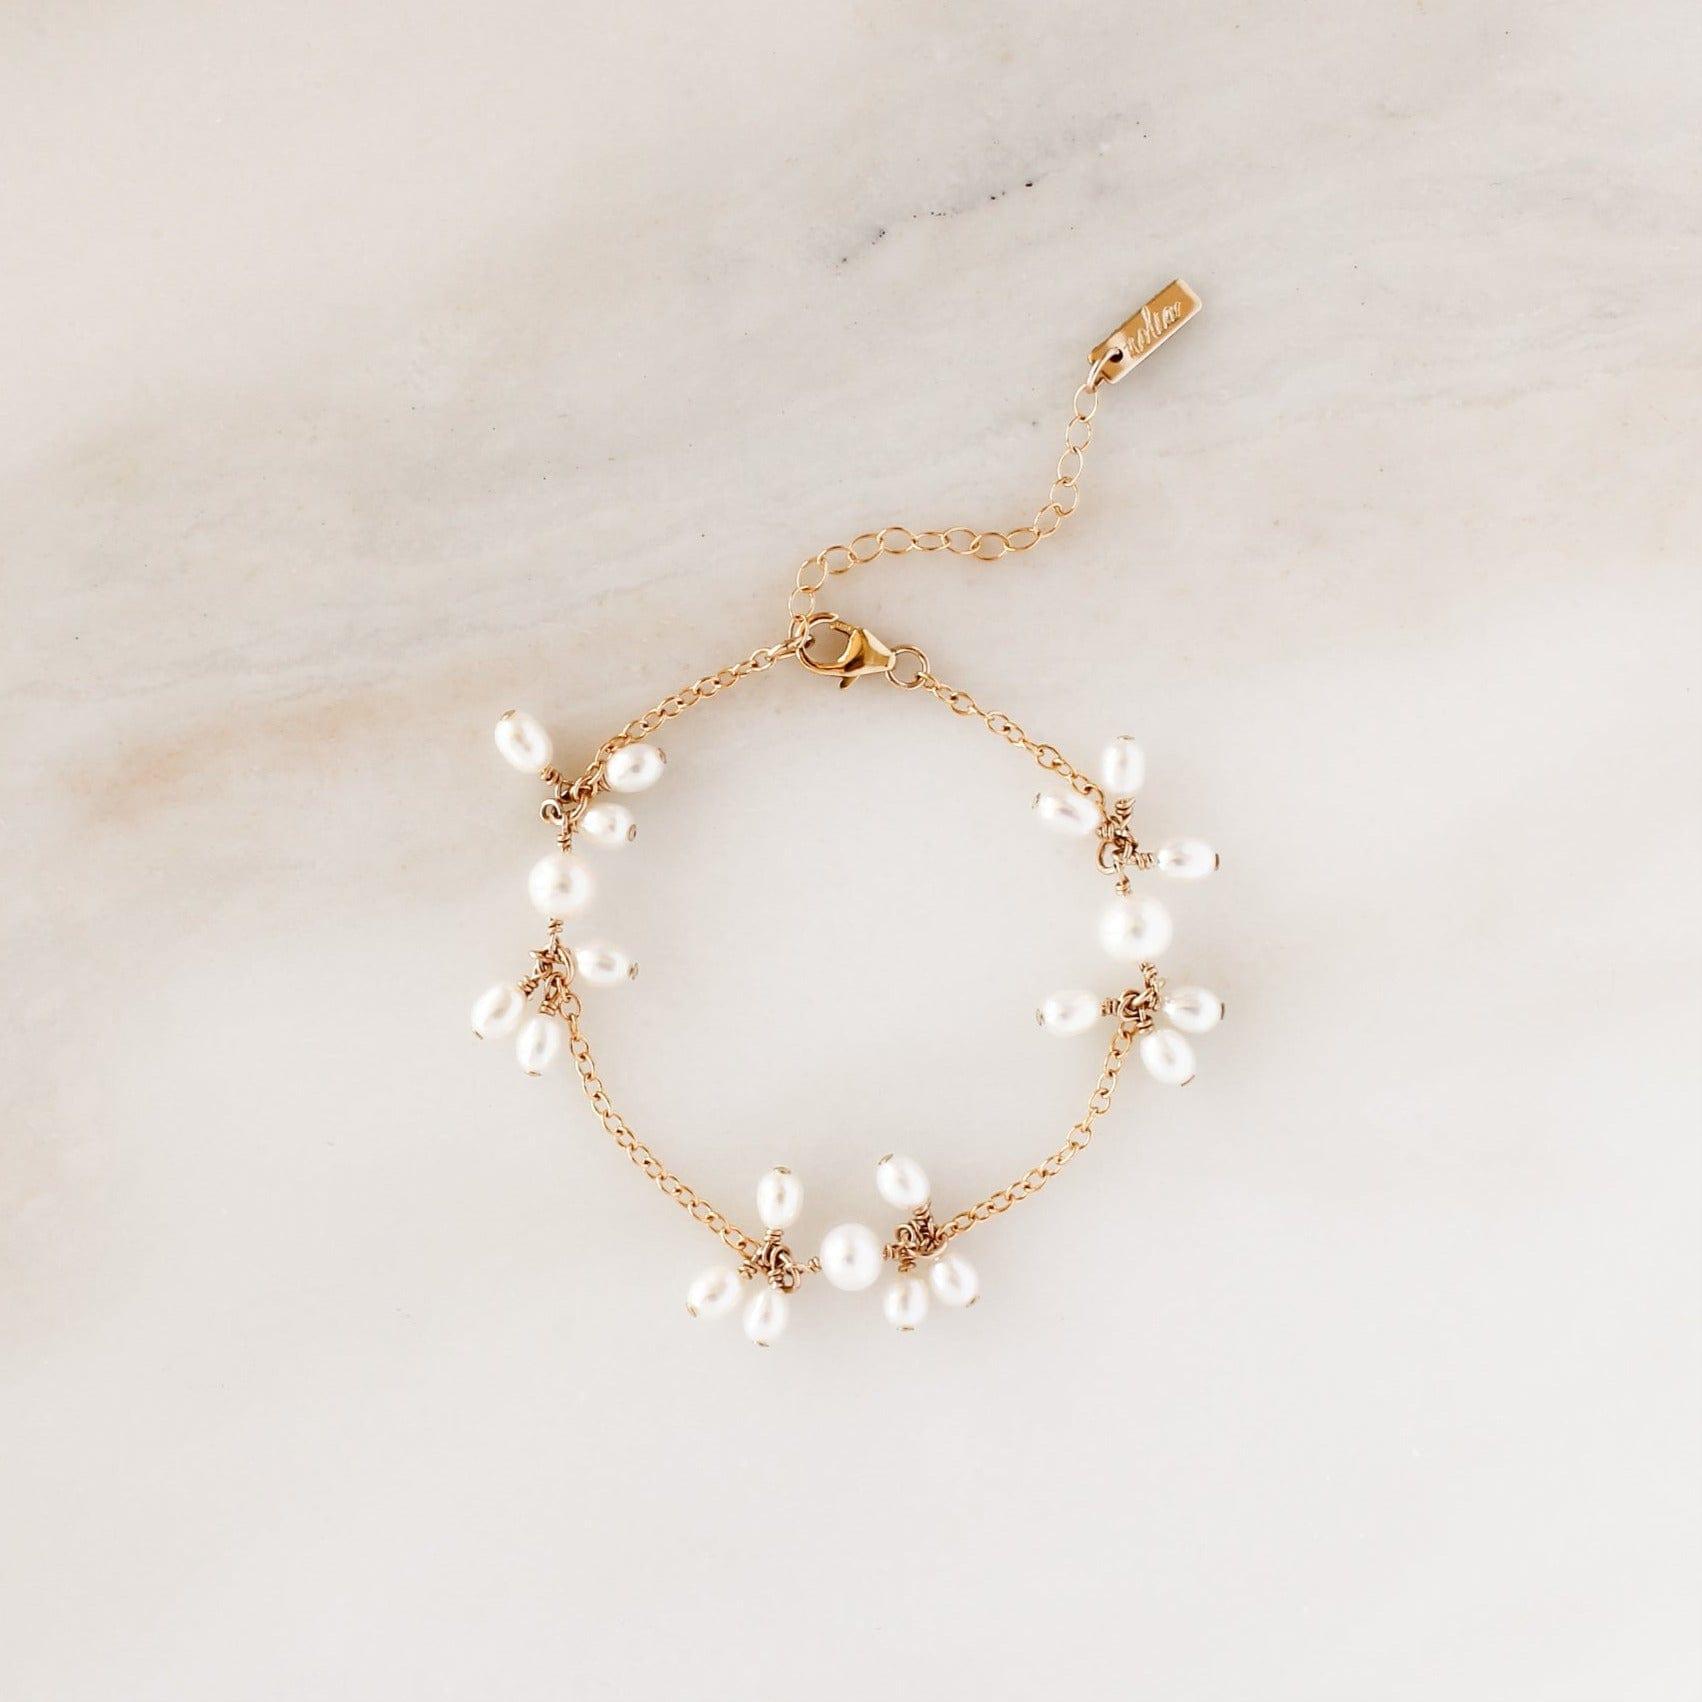 Pearl Blossom Bracelet - Nolia Jewelry - Meaningful + Sustainably Handcrafted Jewelry